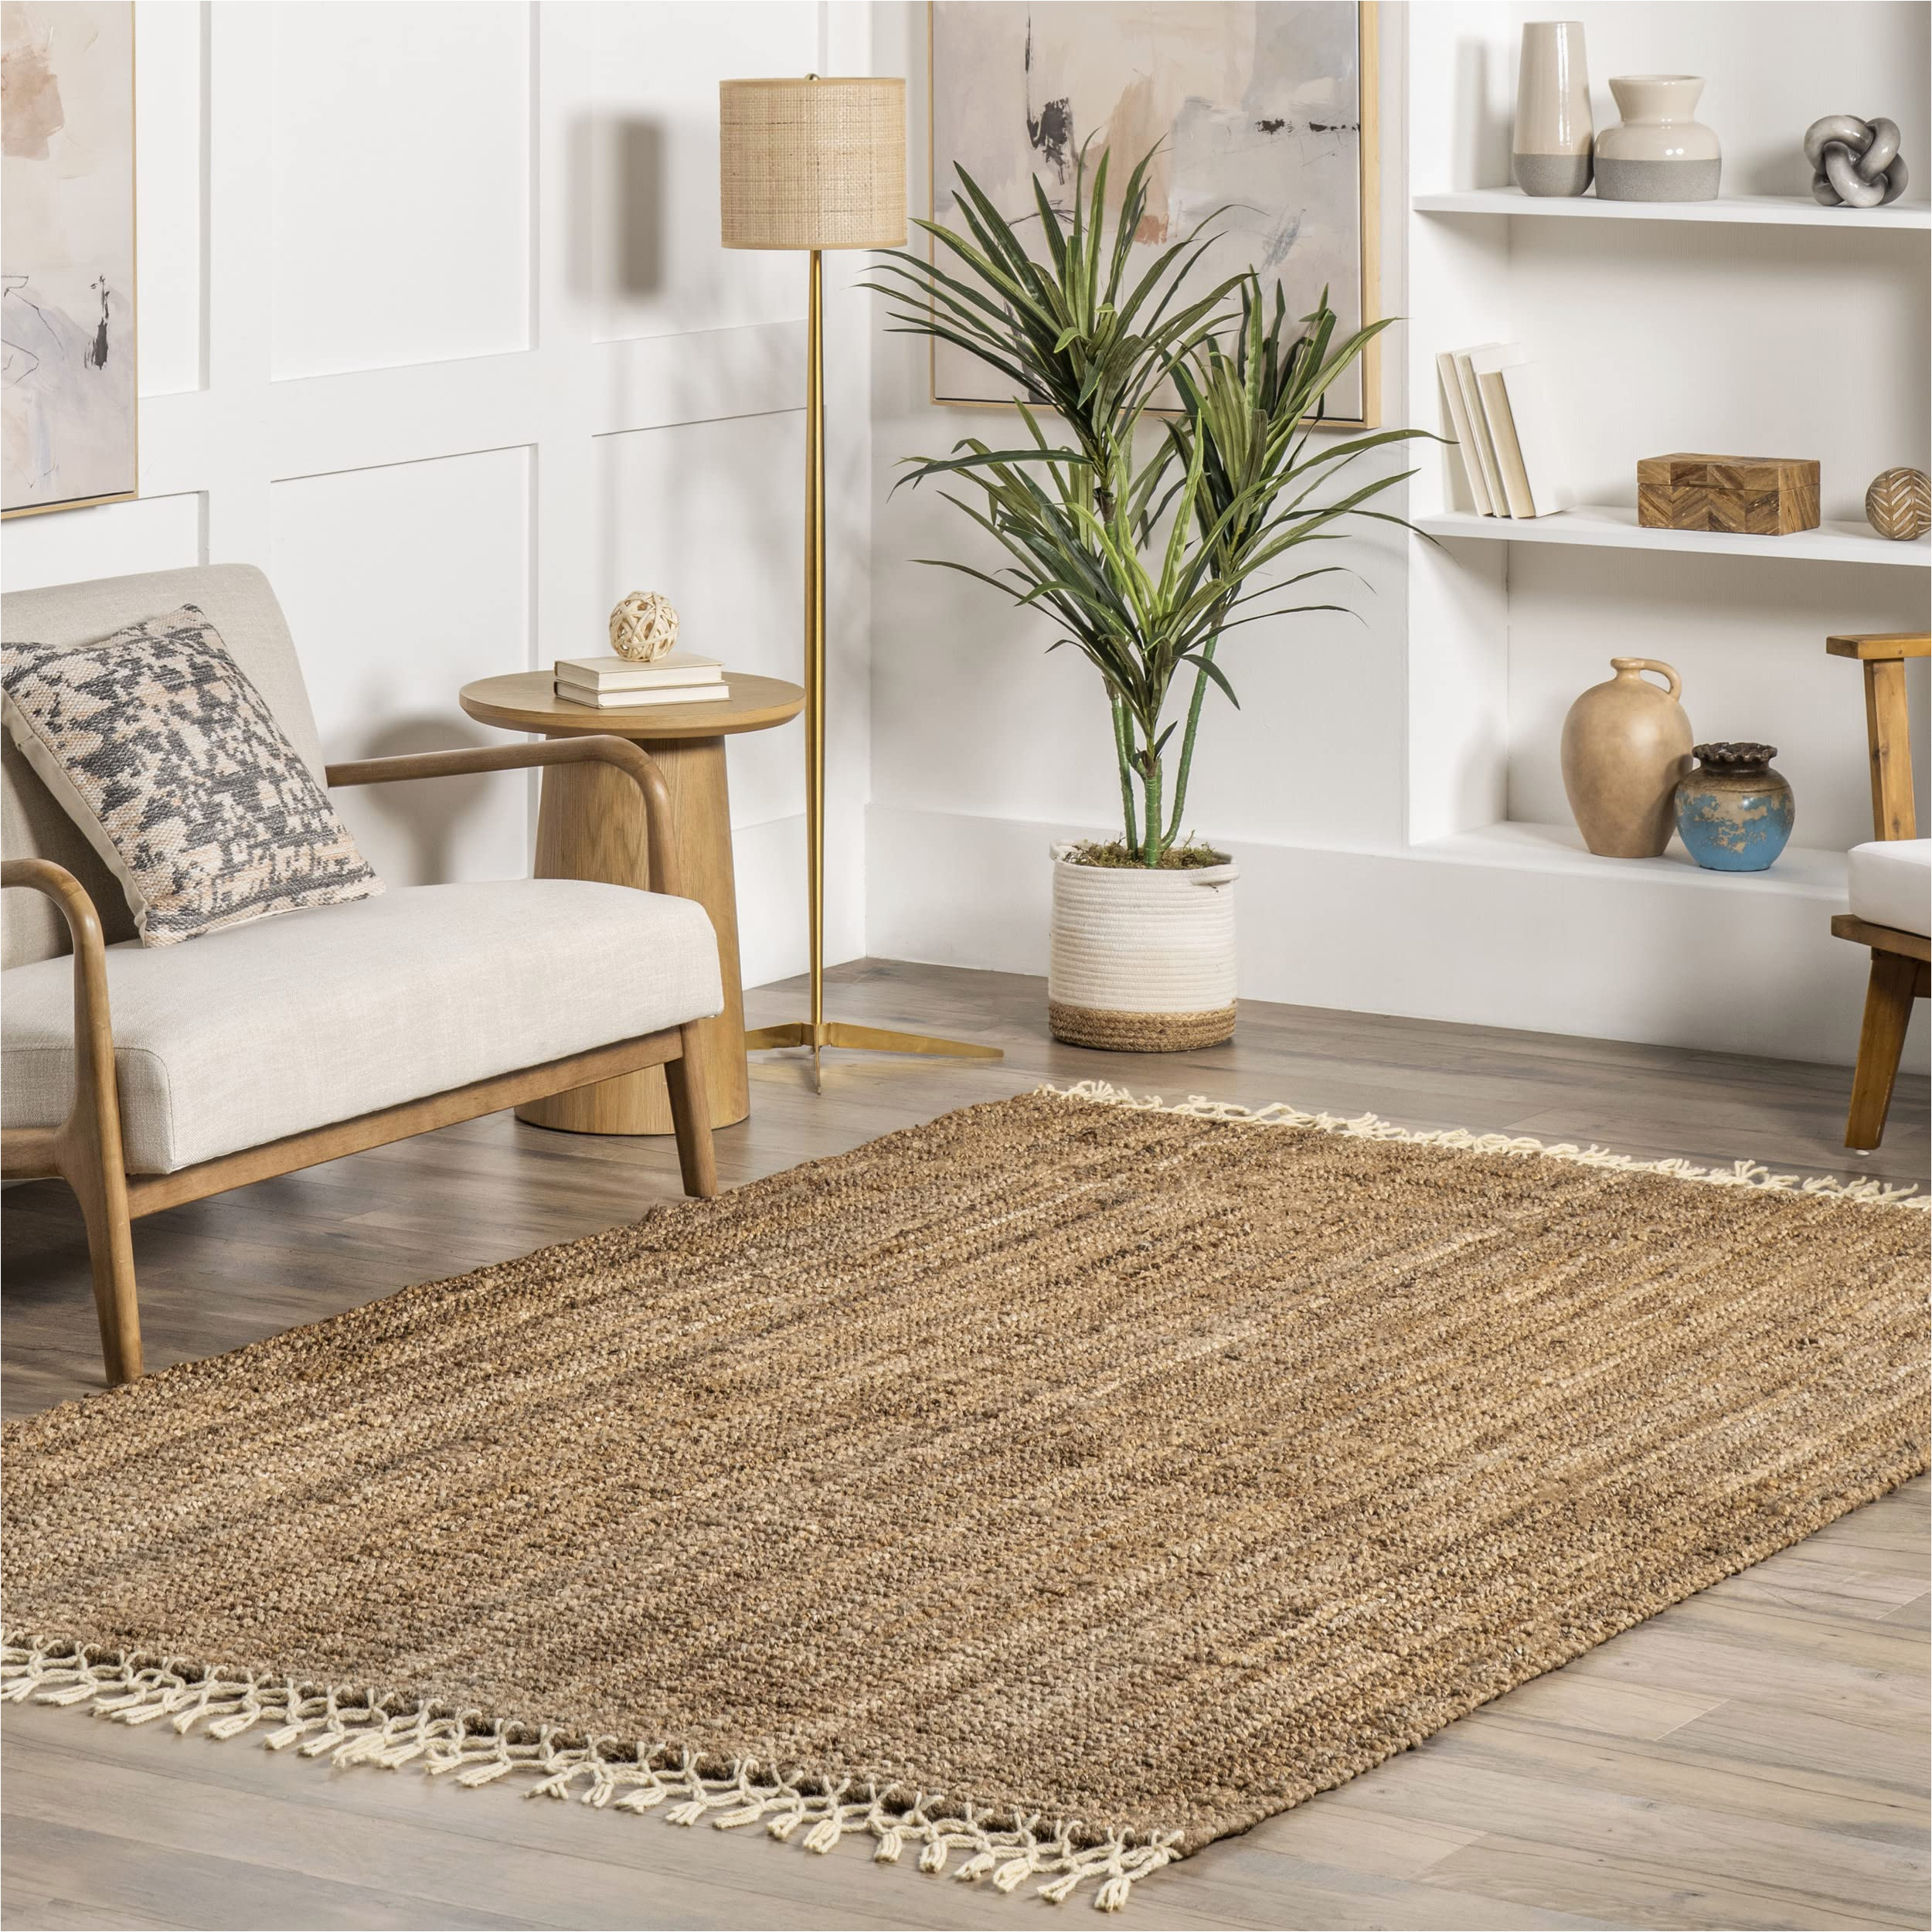 Hand Woven Wool area Rugs Nuloom Raleigh Hand Woven Wool area Rug, 4 Ft X 6 Ft, Natural